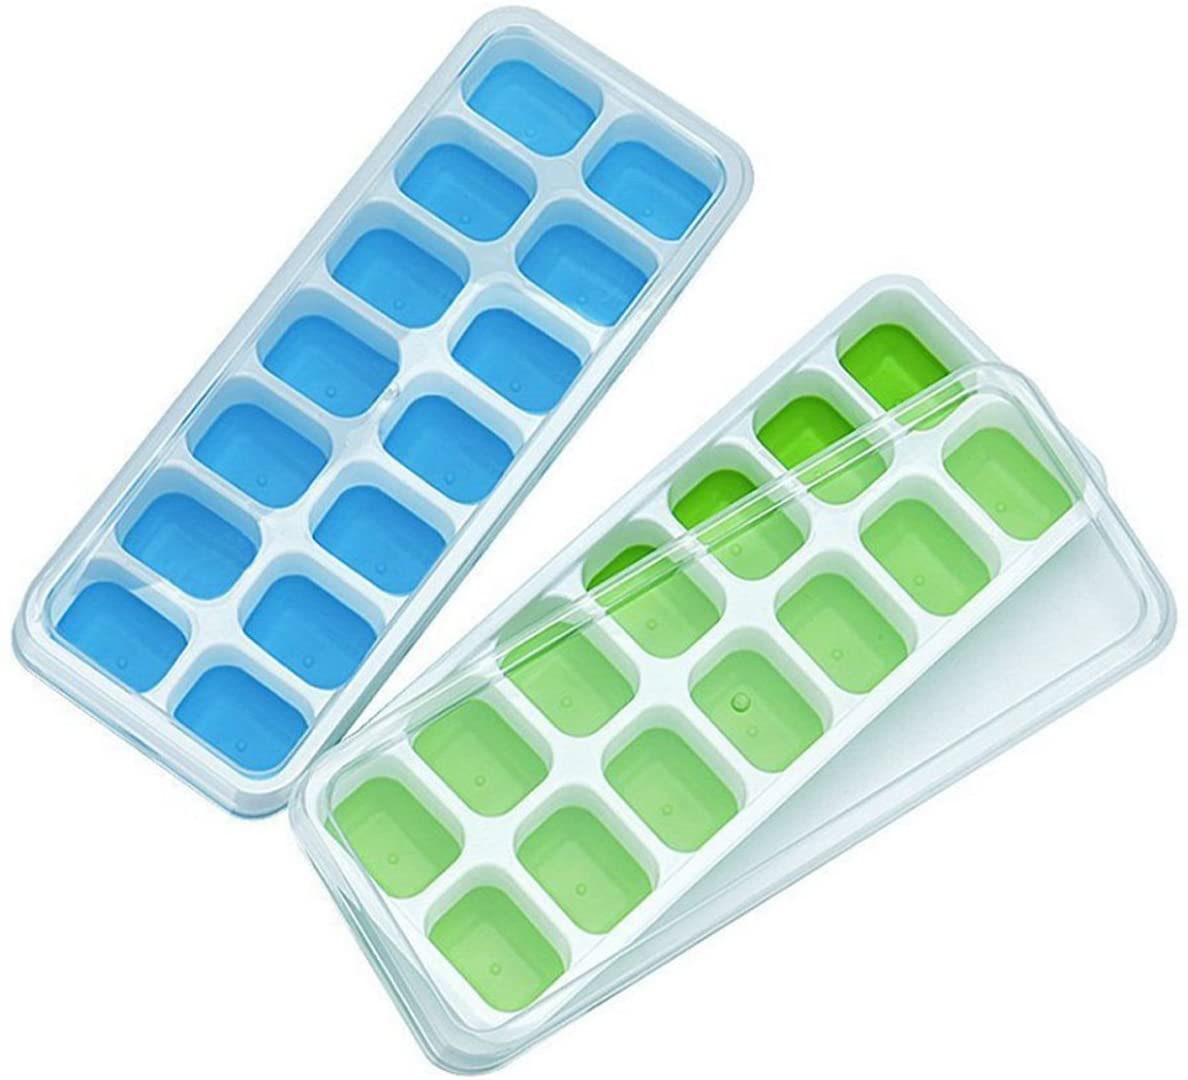 Flexible and easy to release BPA-free 14 mesh silica gel ice tray